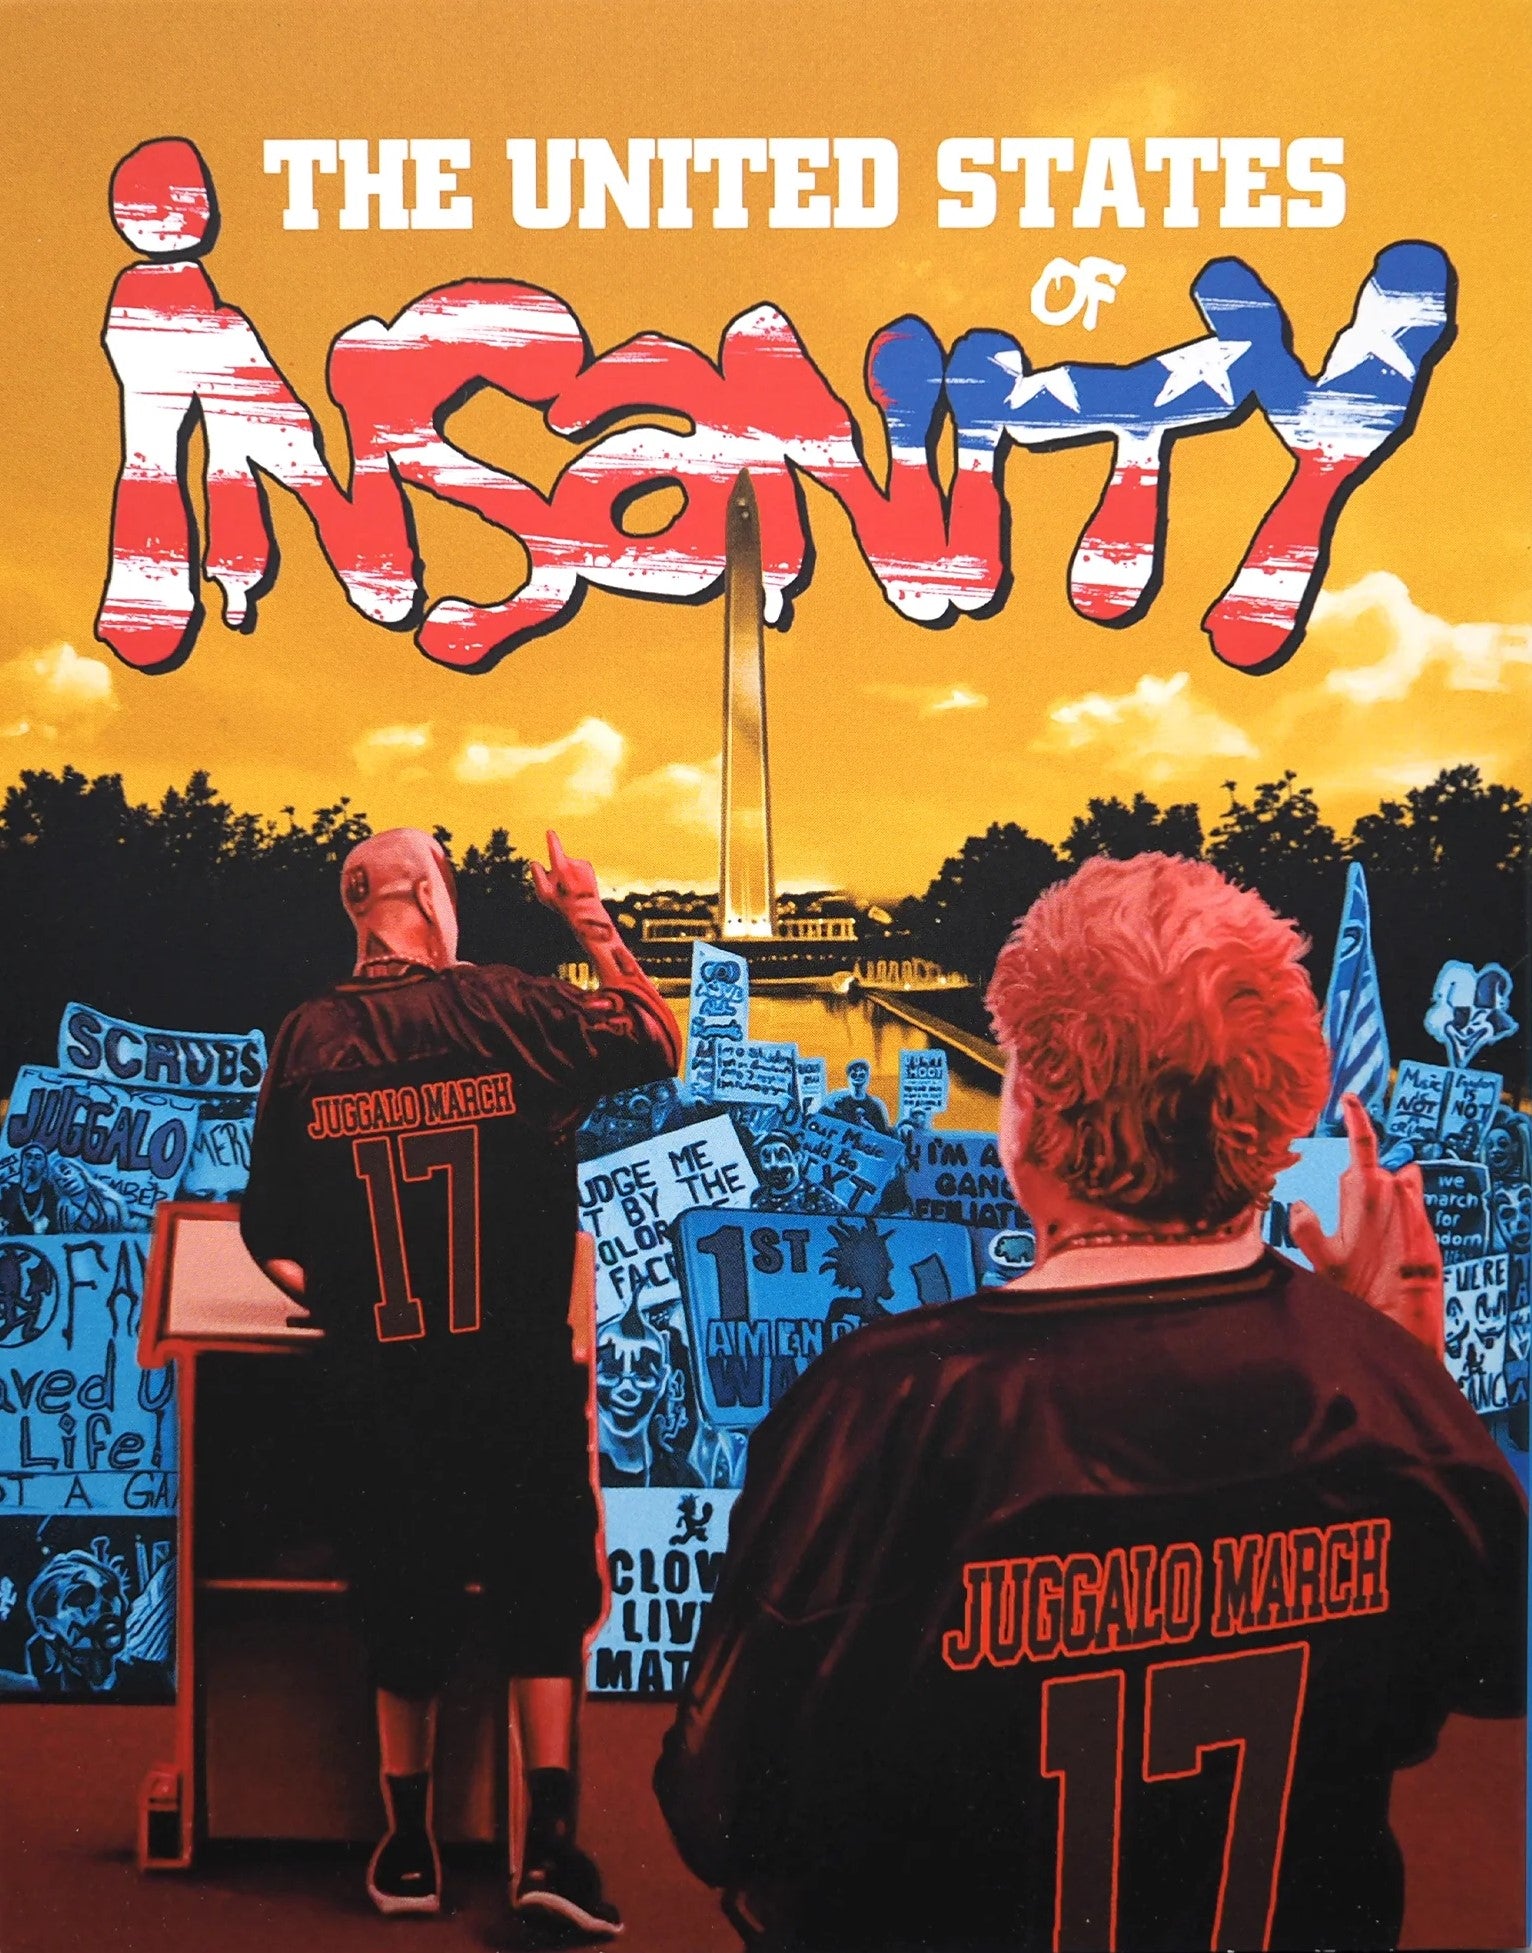 UNITED STATES OF INSANITY (LIMITED EDITION) BLU-RAY